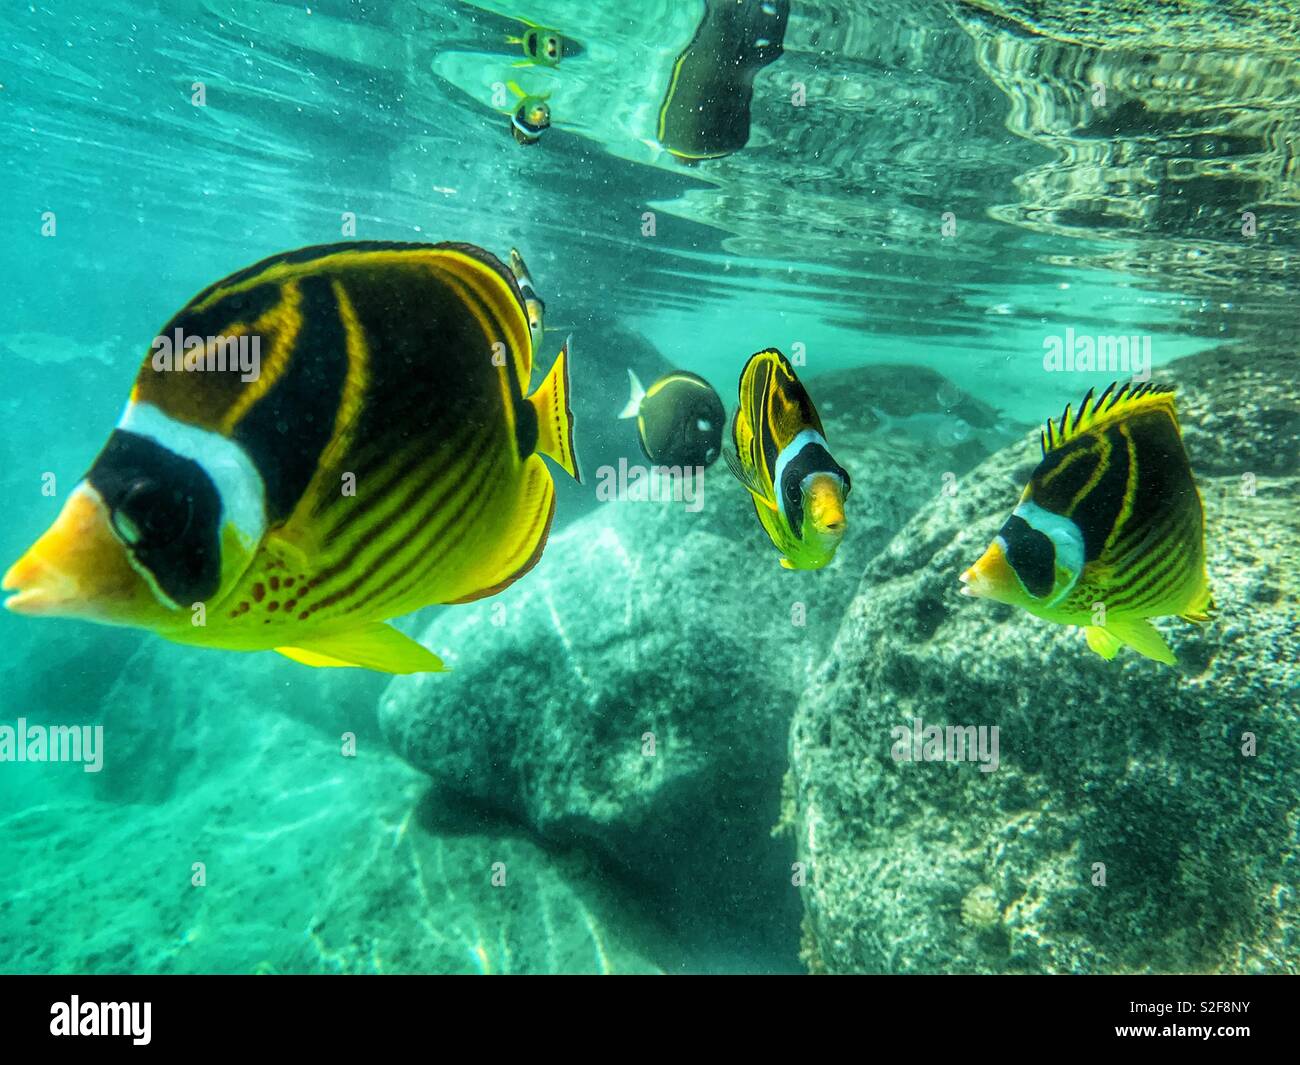 Swimming with a school of Chaetodon lunula, Raccoon Butterflyfish, in Tahiti, French Polynesia Stock Photo